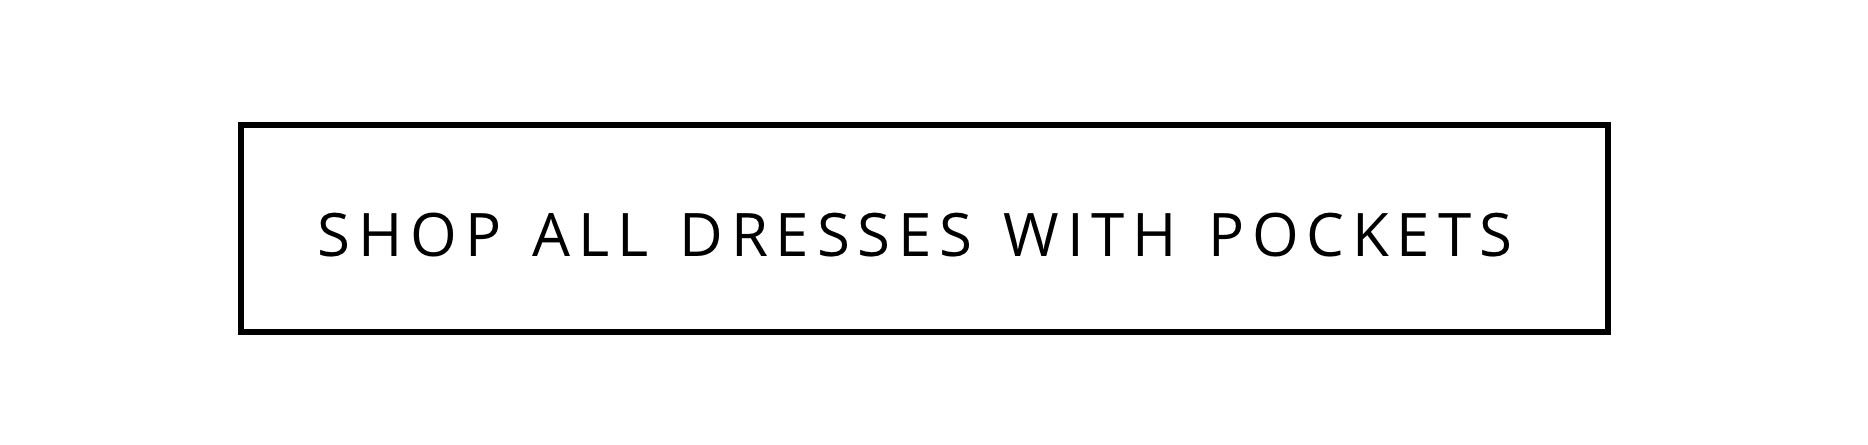 all dresses with pockets